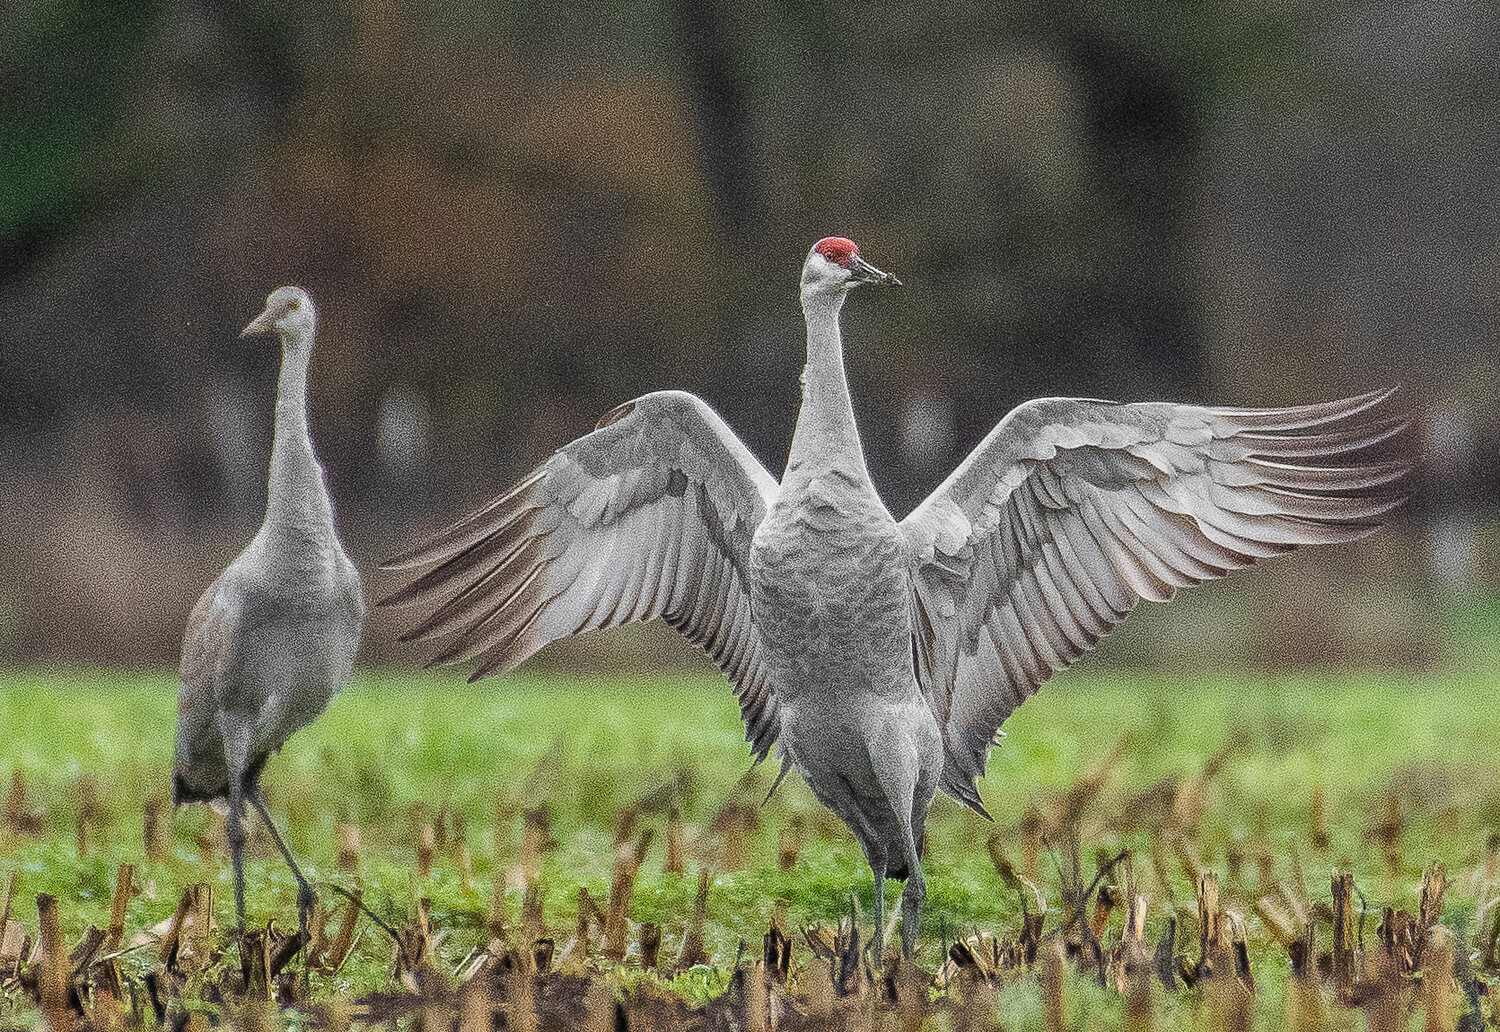 A tall sandhill crane spreads its wings while looking toward other, smaller cranes in a field near Porter on Wednesday, Nov. 22.